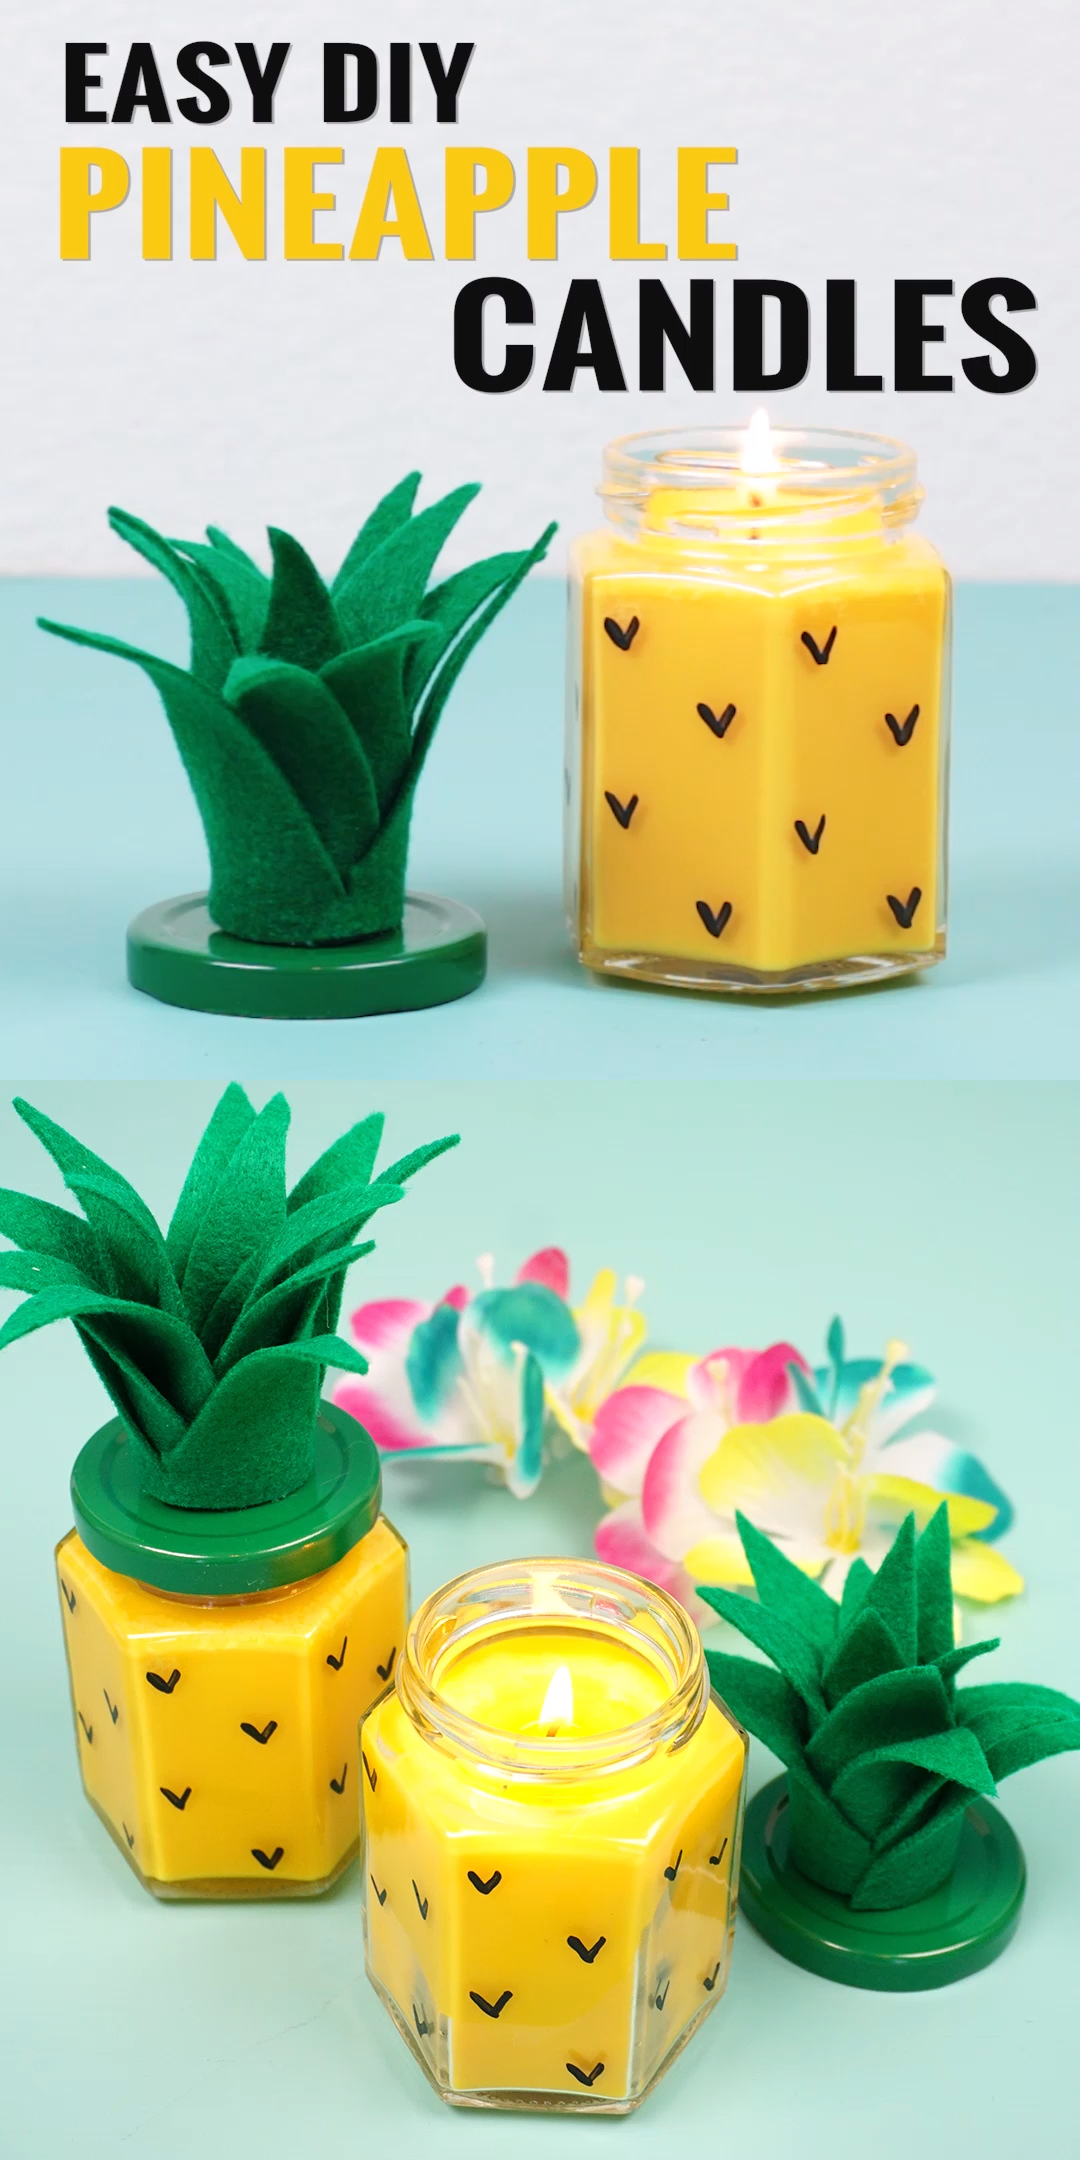 Easy DIY Pineapple Candles - Easy DIY Pineapple Candles -   19 diy gifts ideas